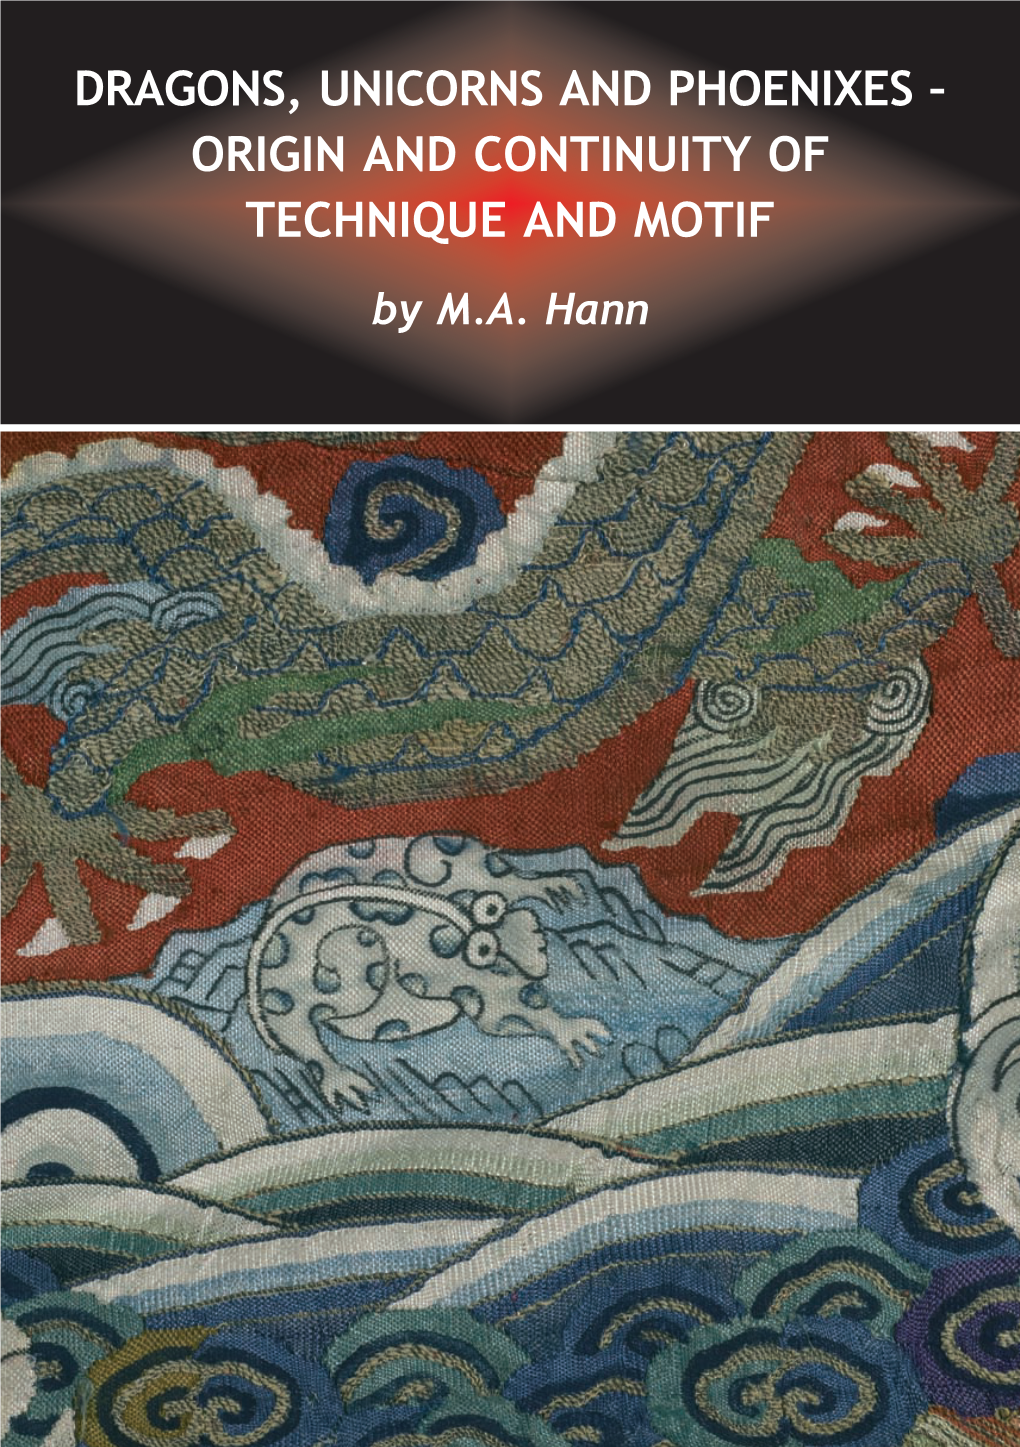 DRAGONS, UNICORNS and PHOENIXES – ORIGIN and CONTINUITY of TECHNIQUE and MOTIF by M.A